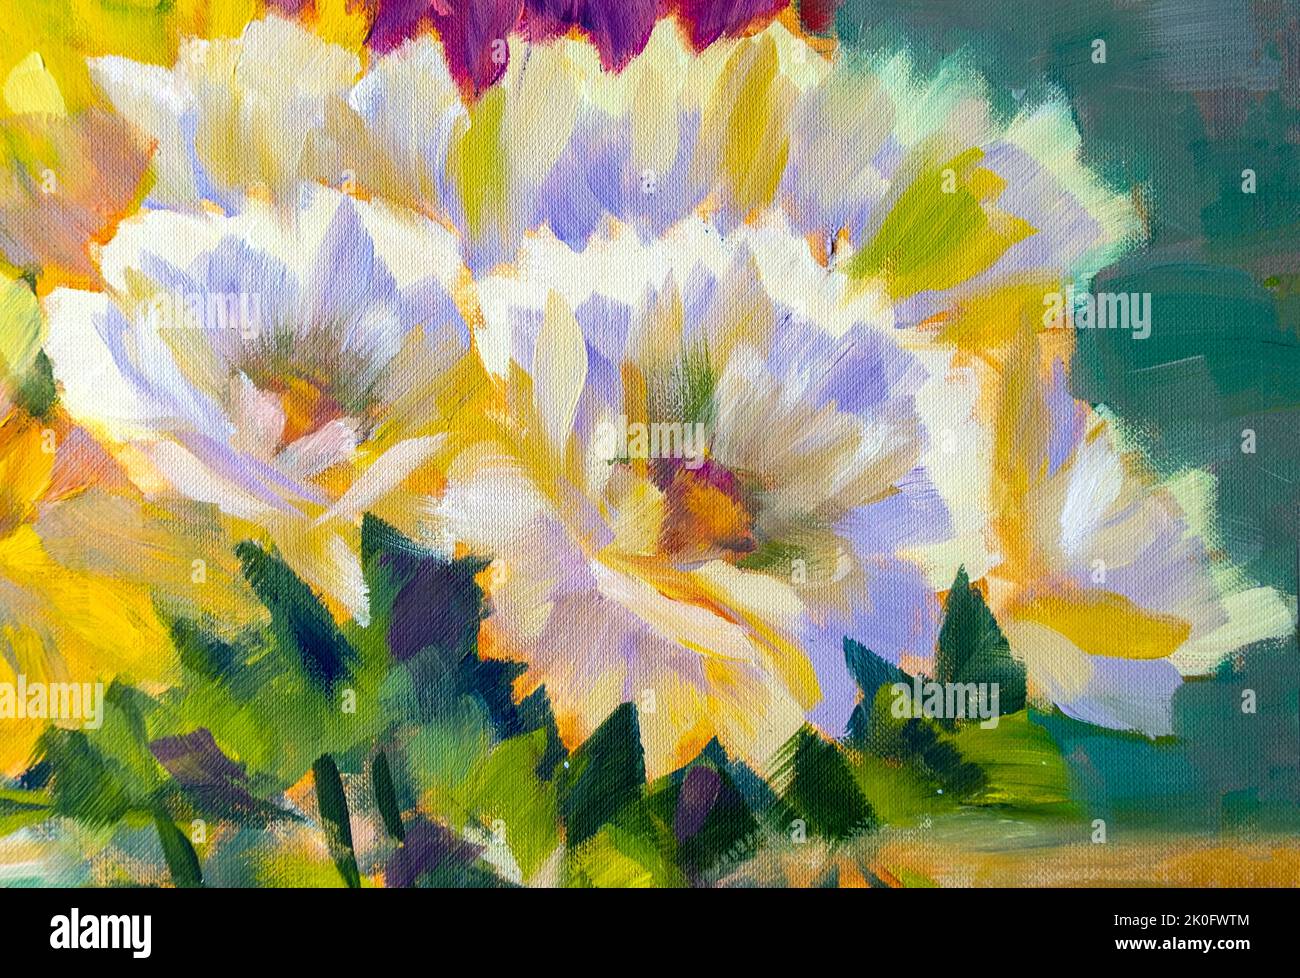 Bouquet of wonderful flowers in the sun, oil painting on canvas. Painting art Stock Photo